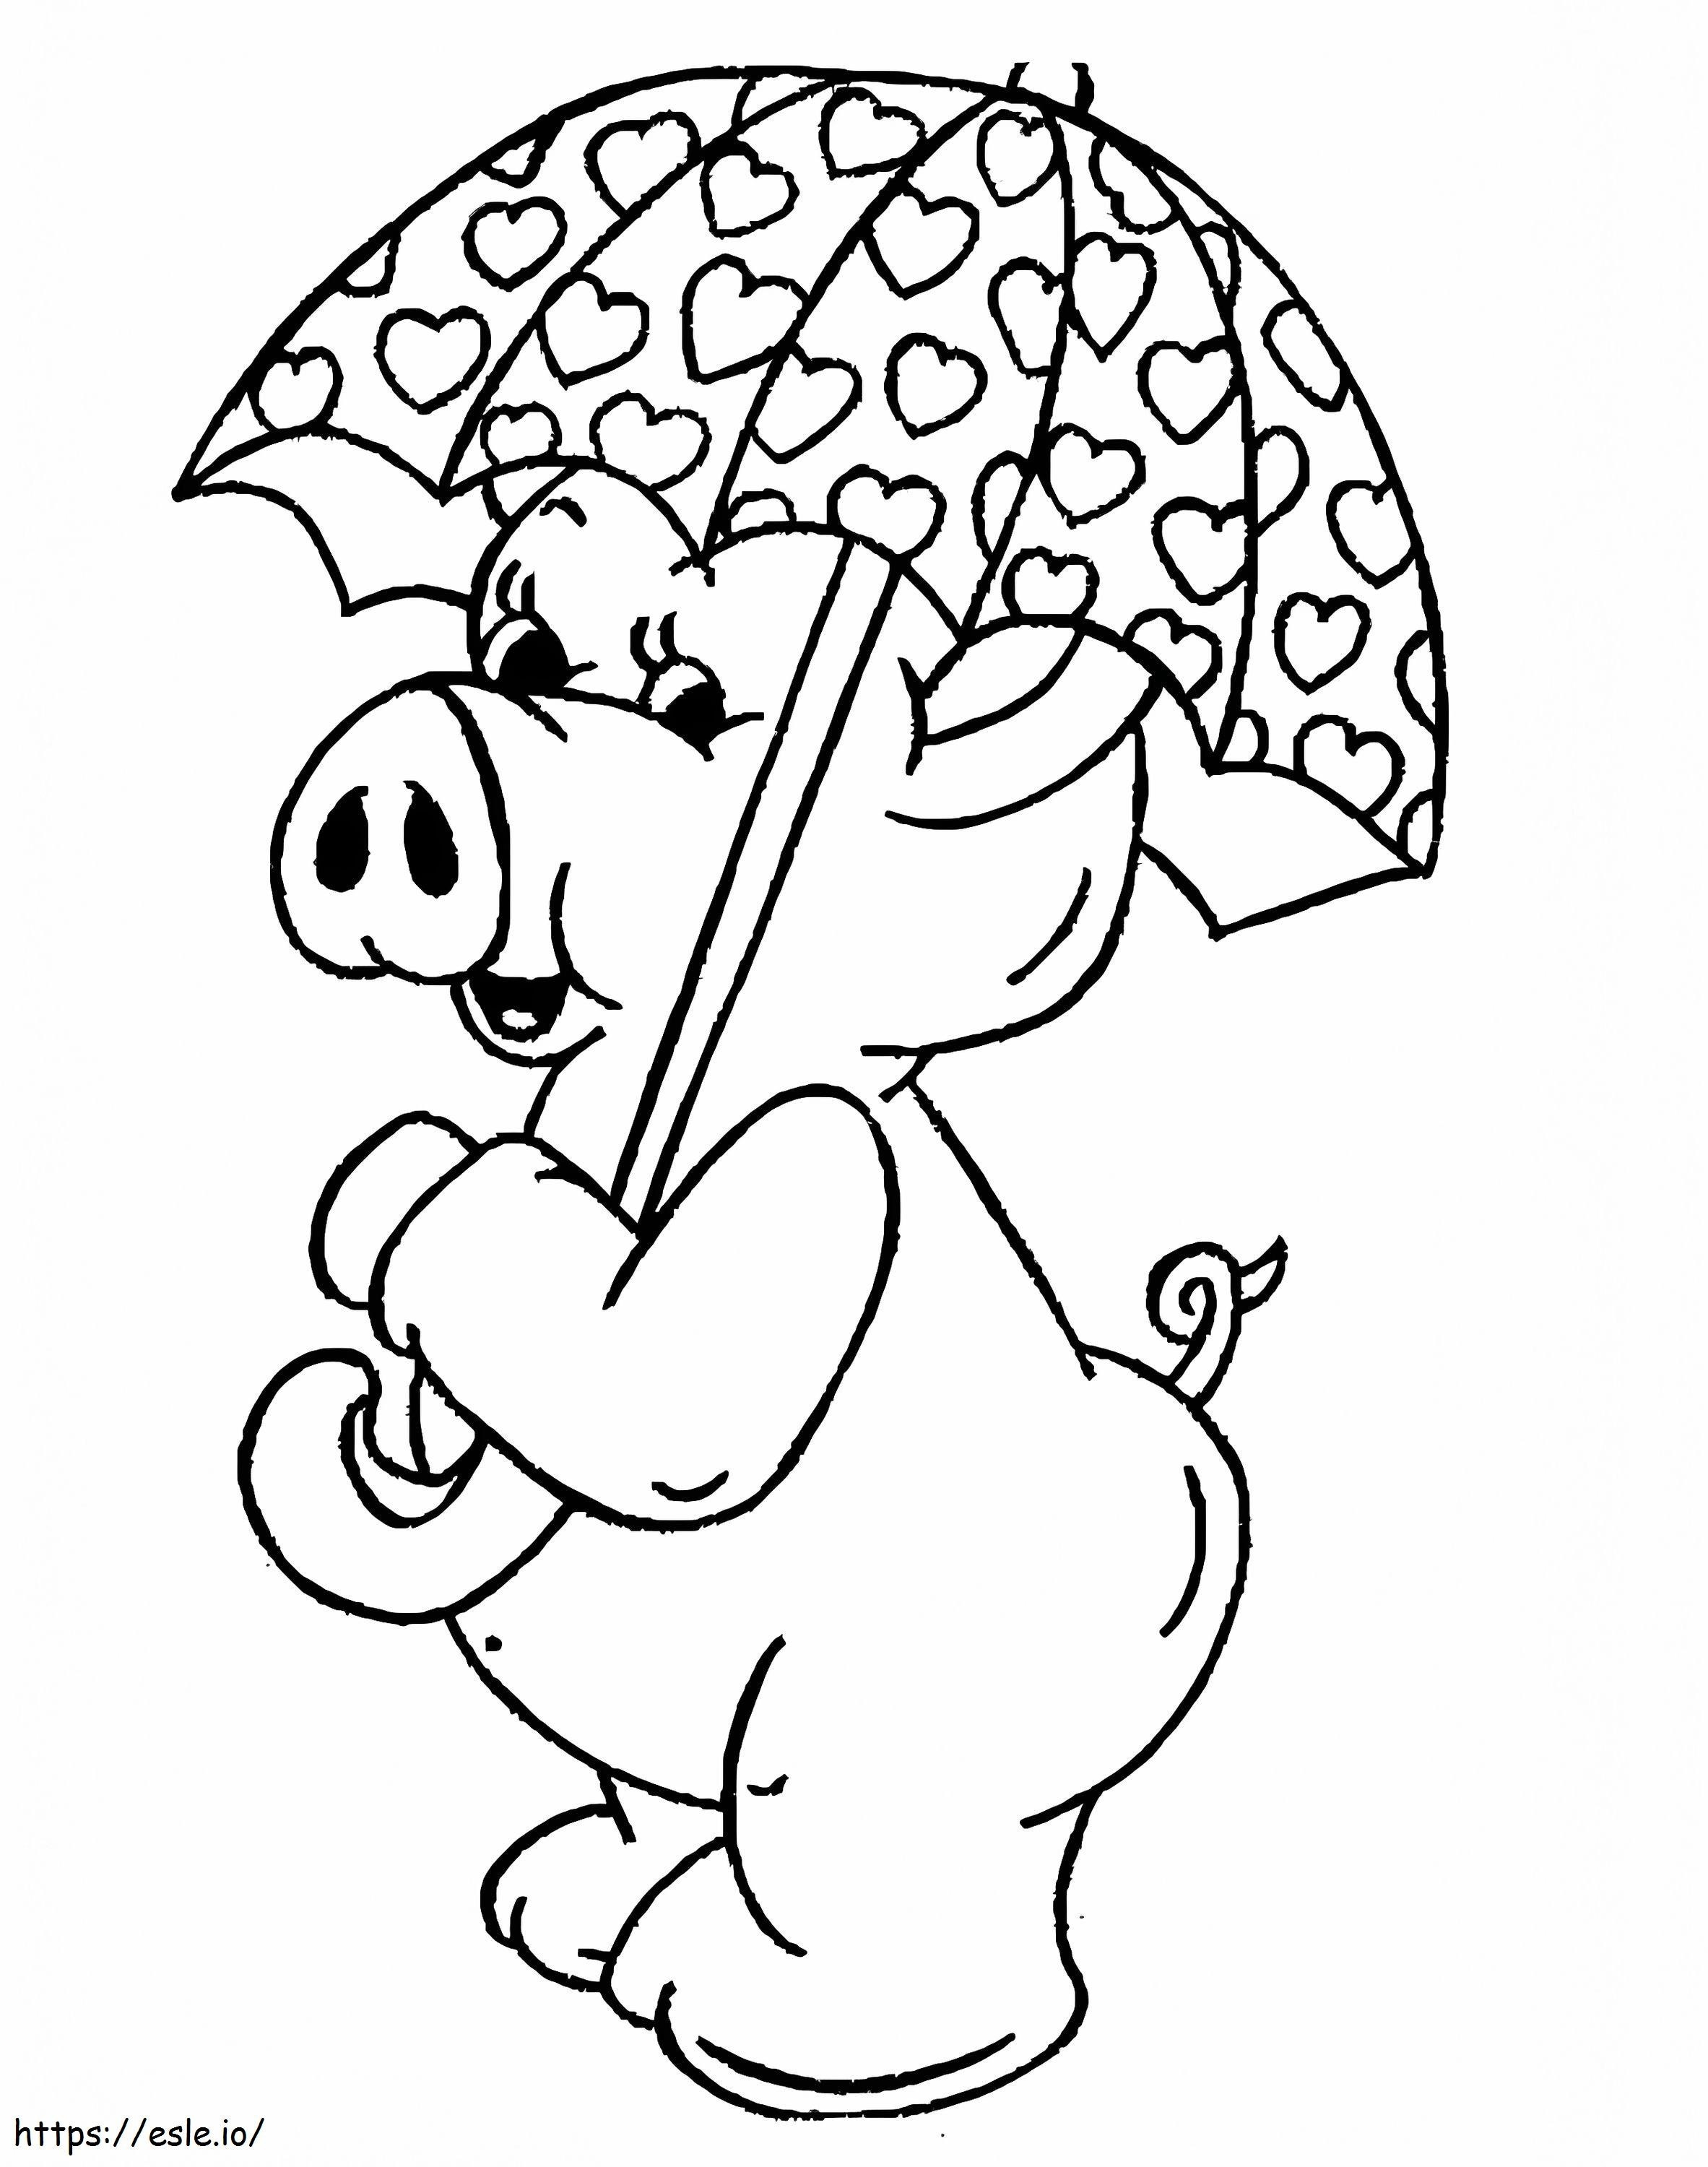 Pig With Umbrella coloring page